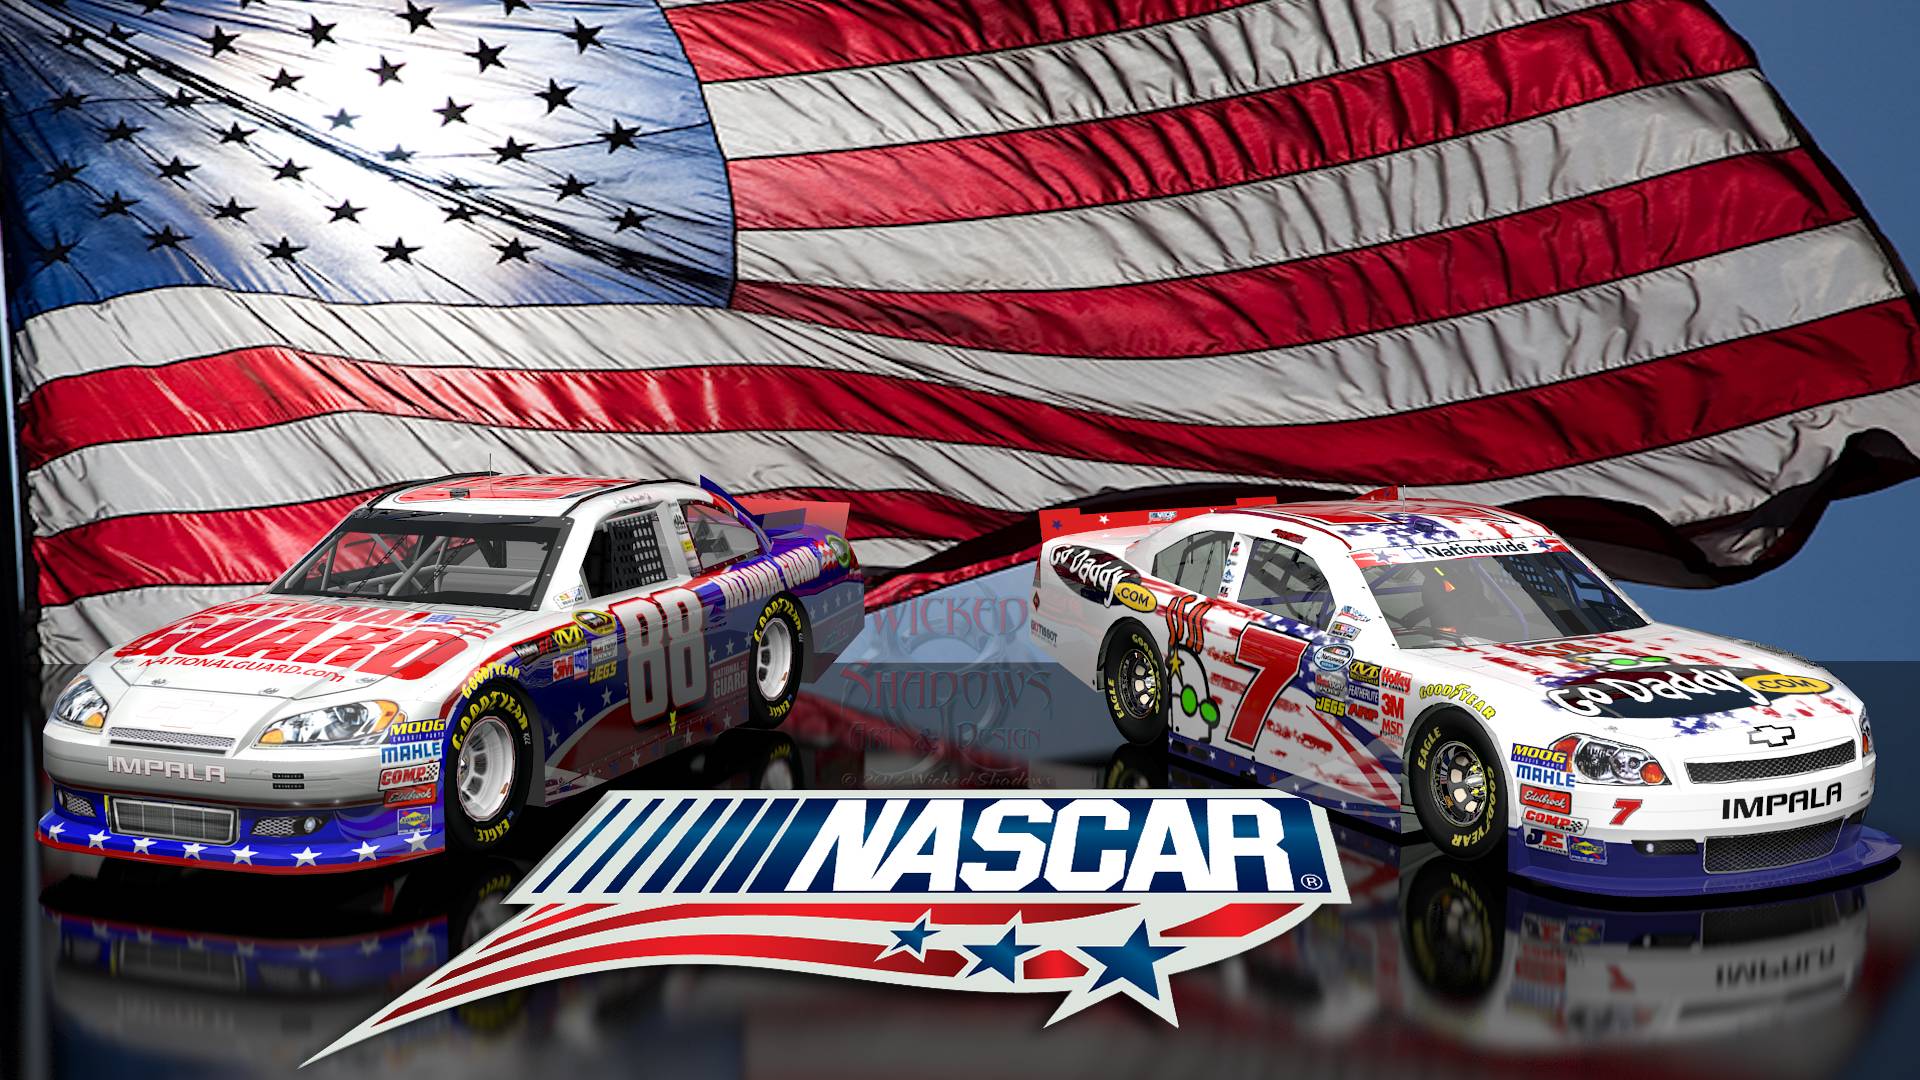 Nascar Wallpapers 2012 wallpapers